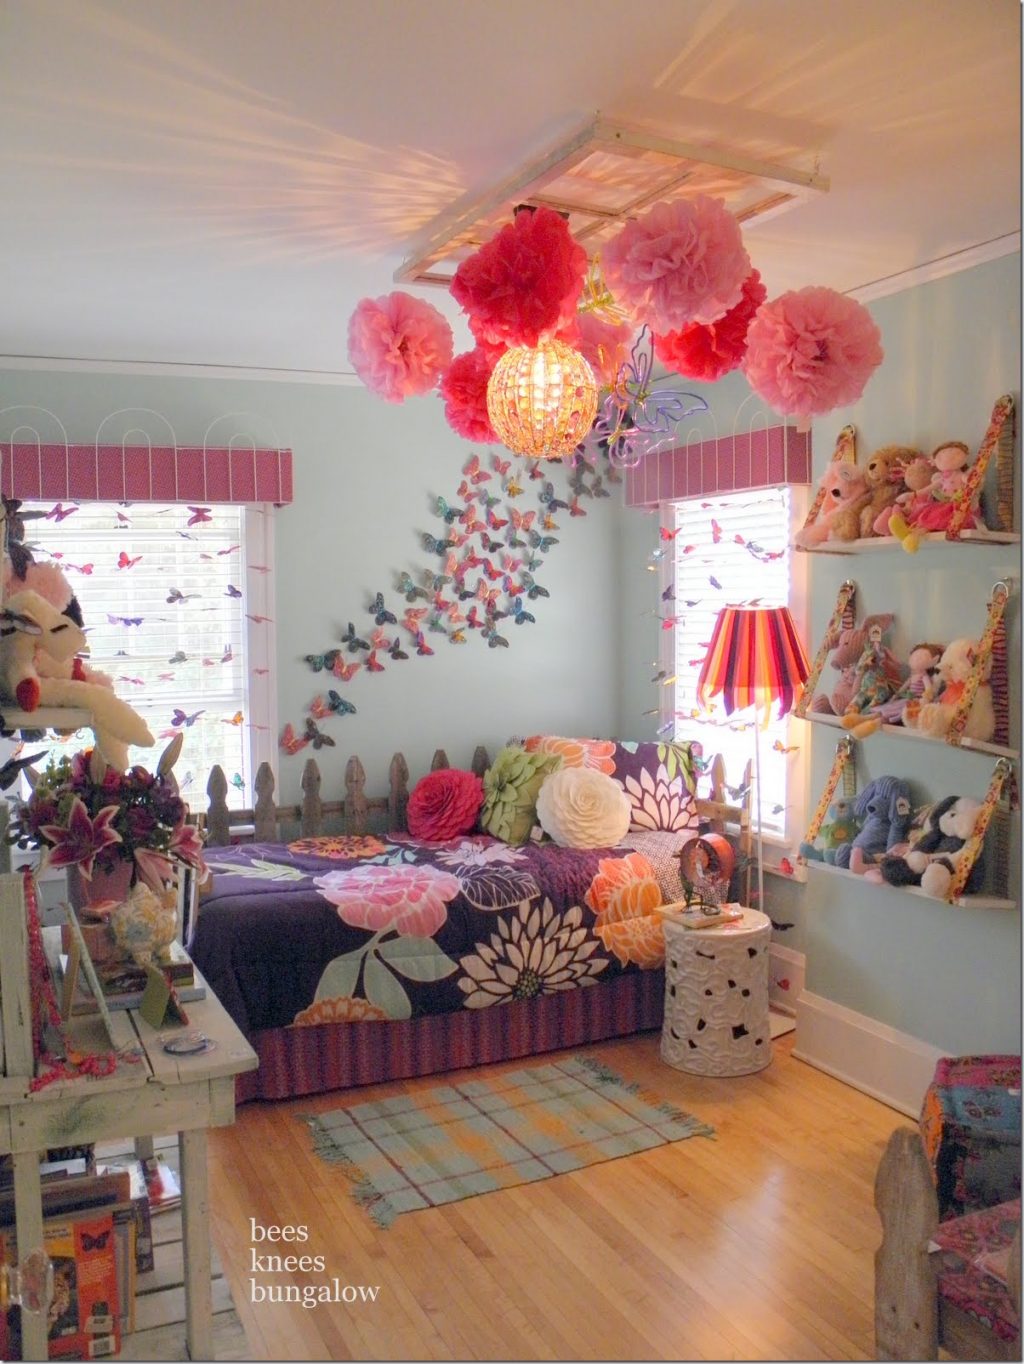 bedroom sets rooms fun decorating cute diy bedrooms bed stuffed animal decoration pink creative colorful teen idea kid butterfly toddler